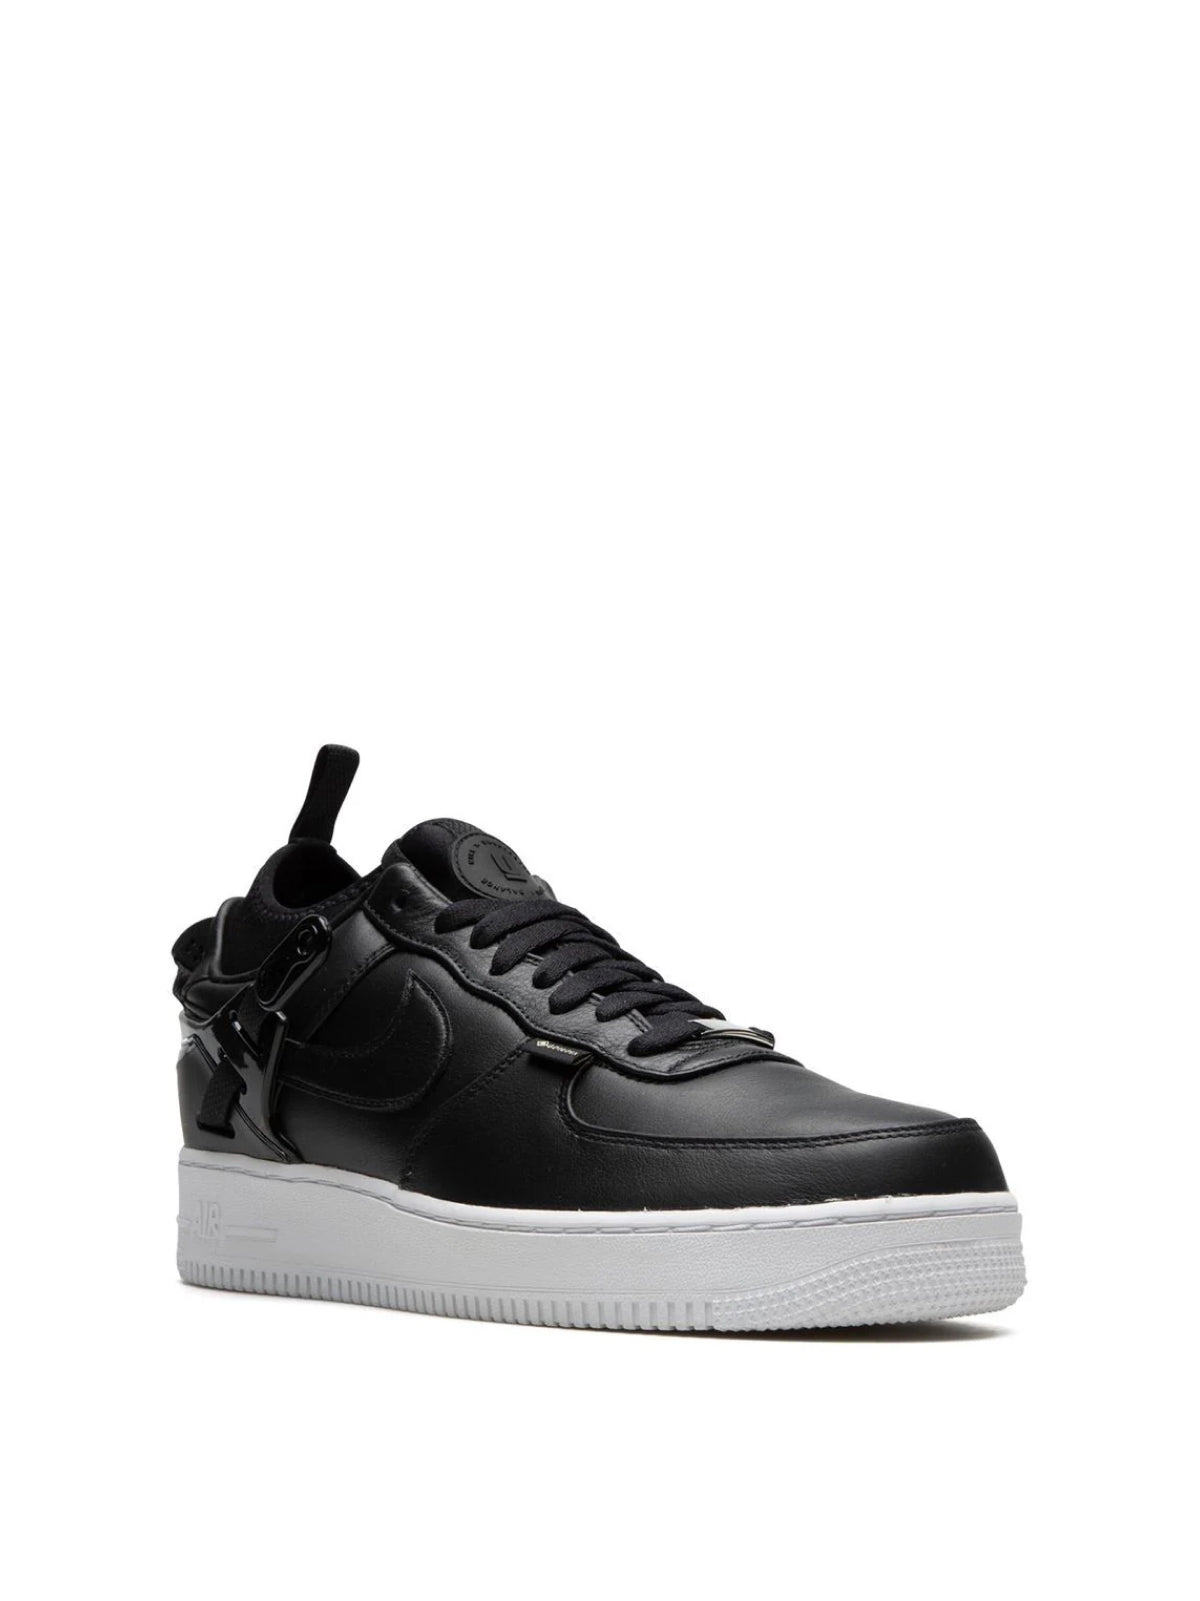 Nike x Undercover Air Force 1 Low SP Sneakers